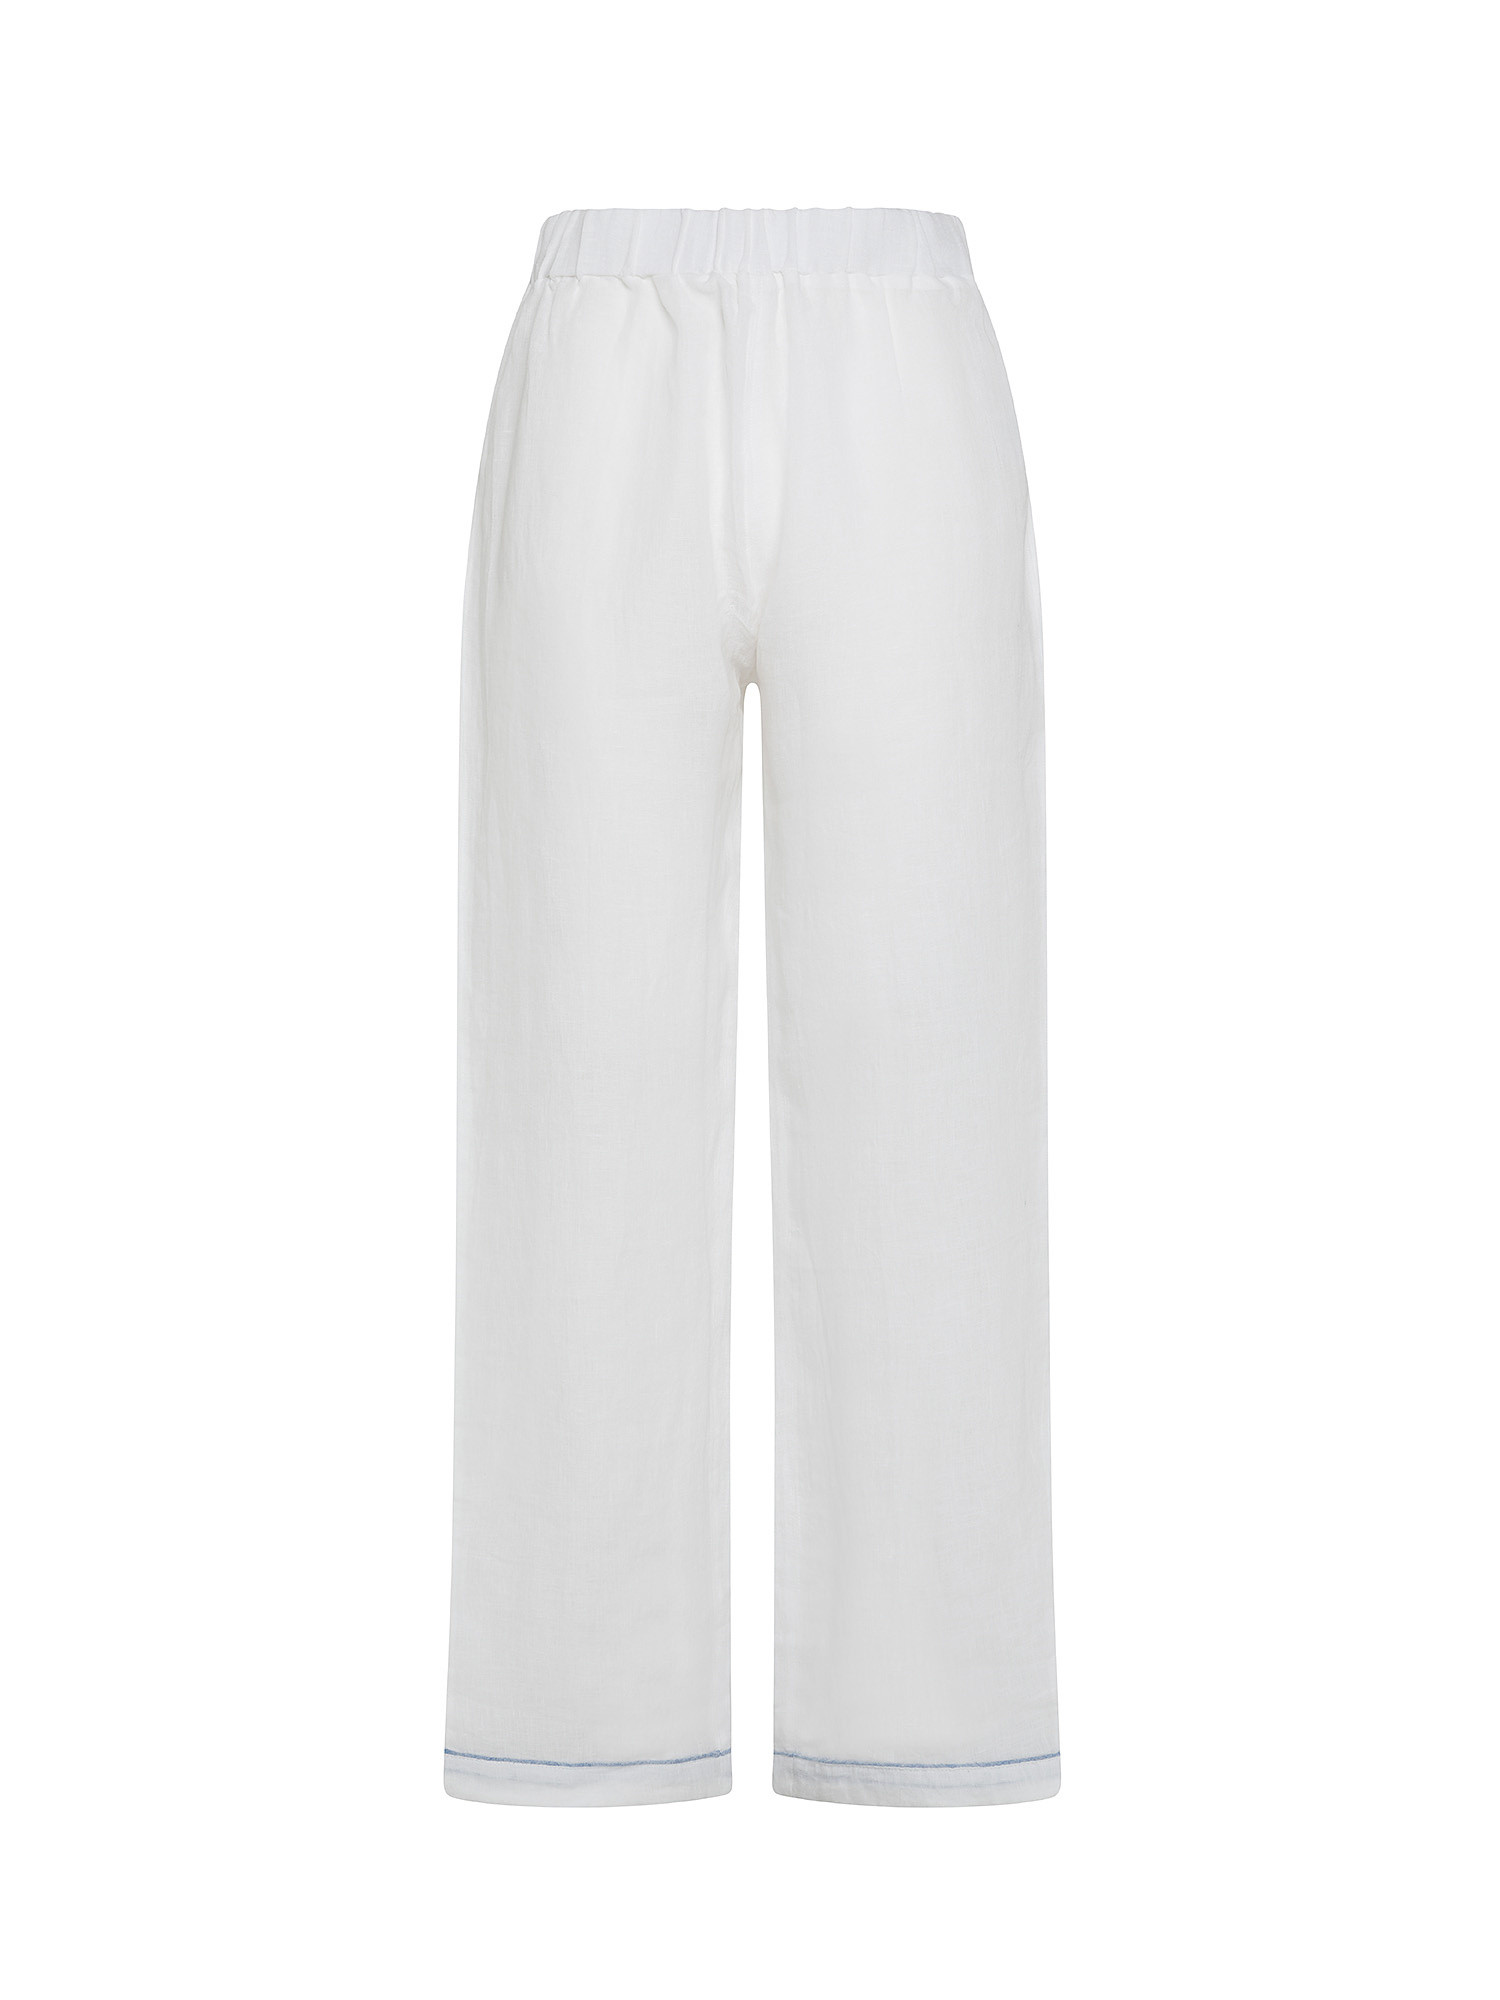 Solid color 100% linen pajama trousers, White, large image number 0